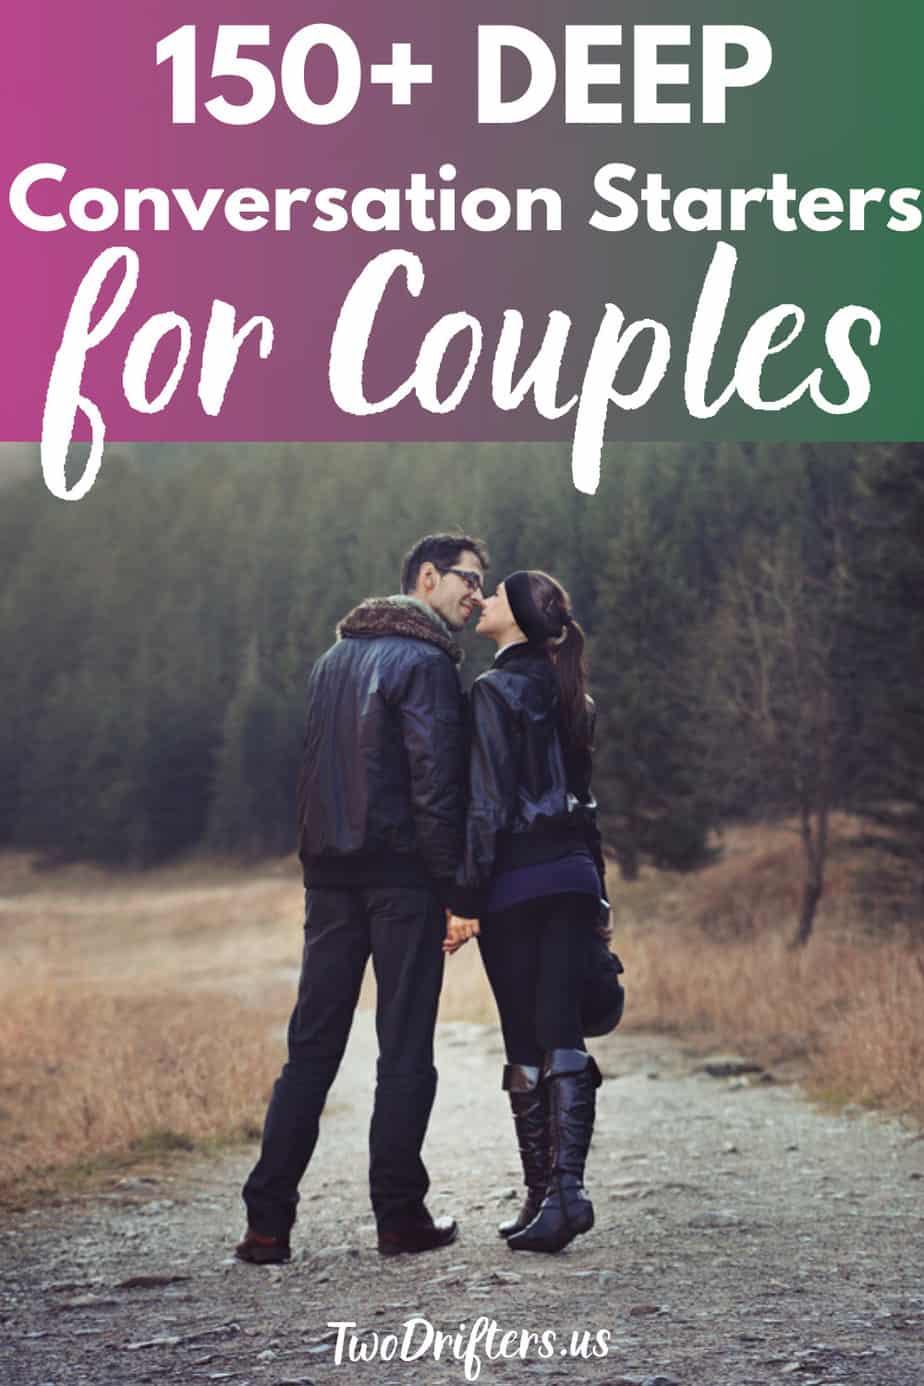 Pinterest social share image that says "150+ Deep Conversation Starters for Couples."